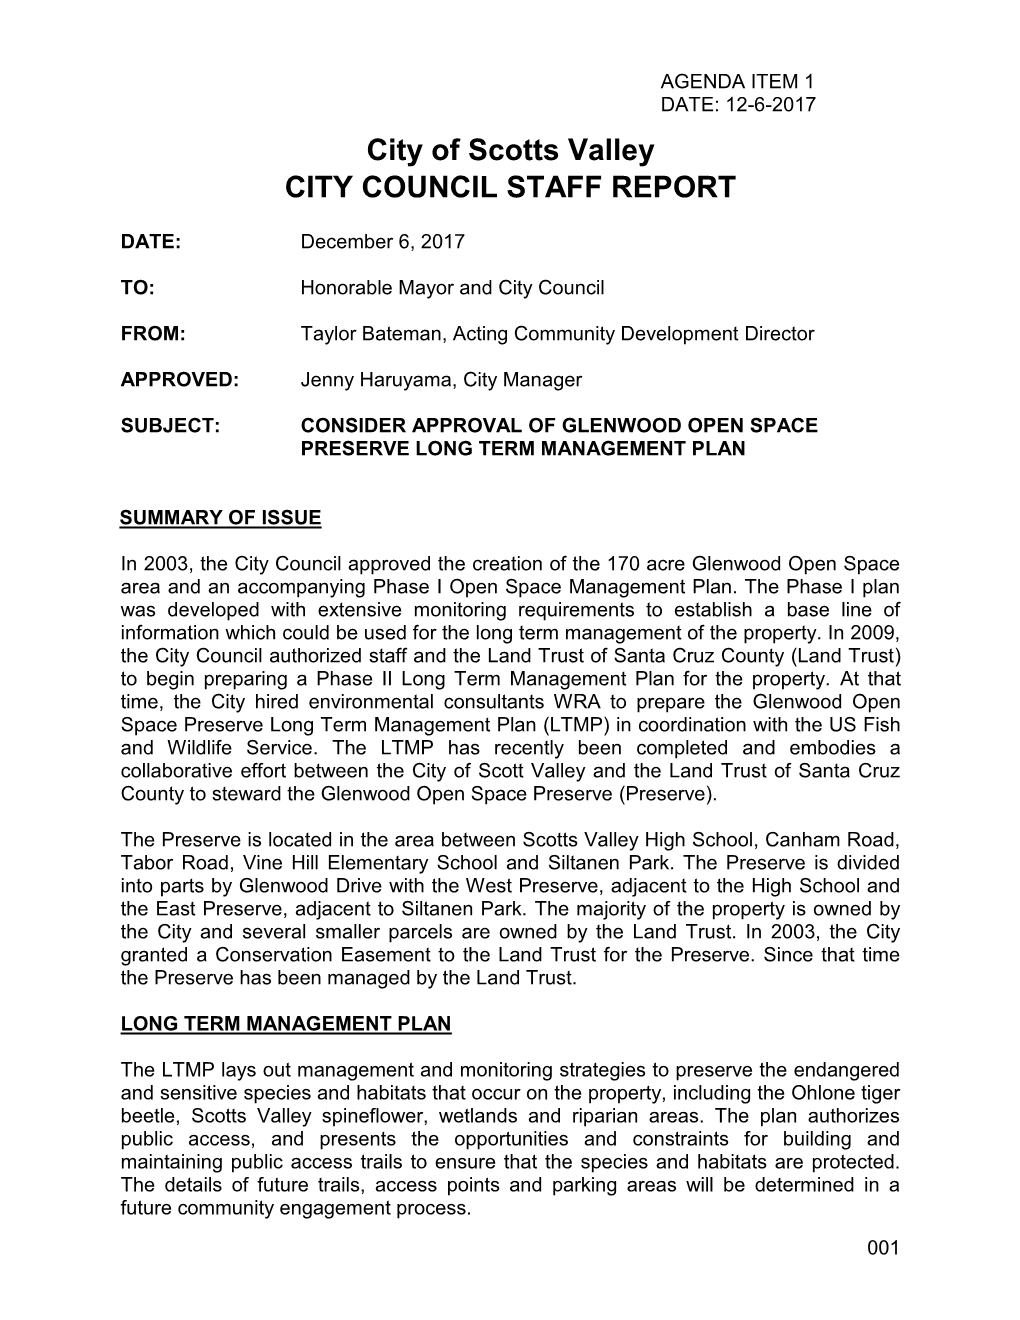 City of Scotts Valley CITY COUNCIL STAFF REPORT